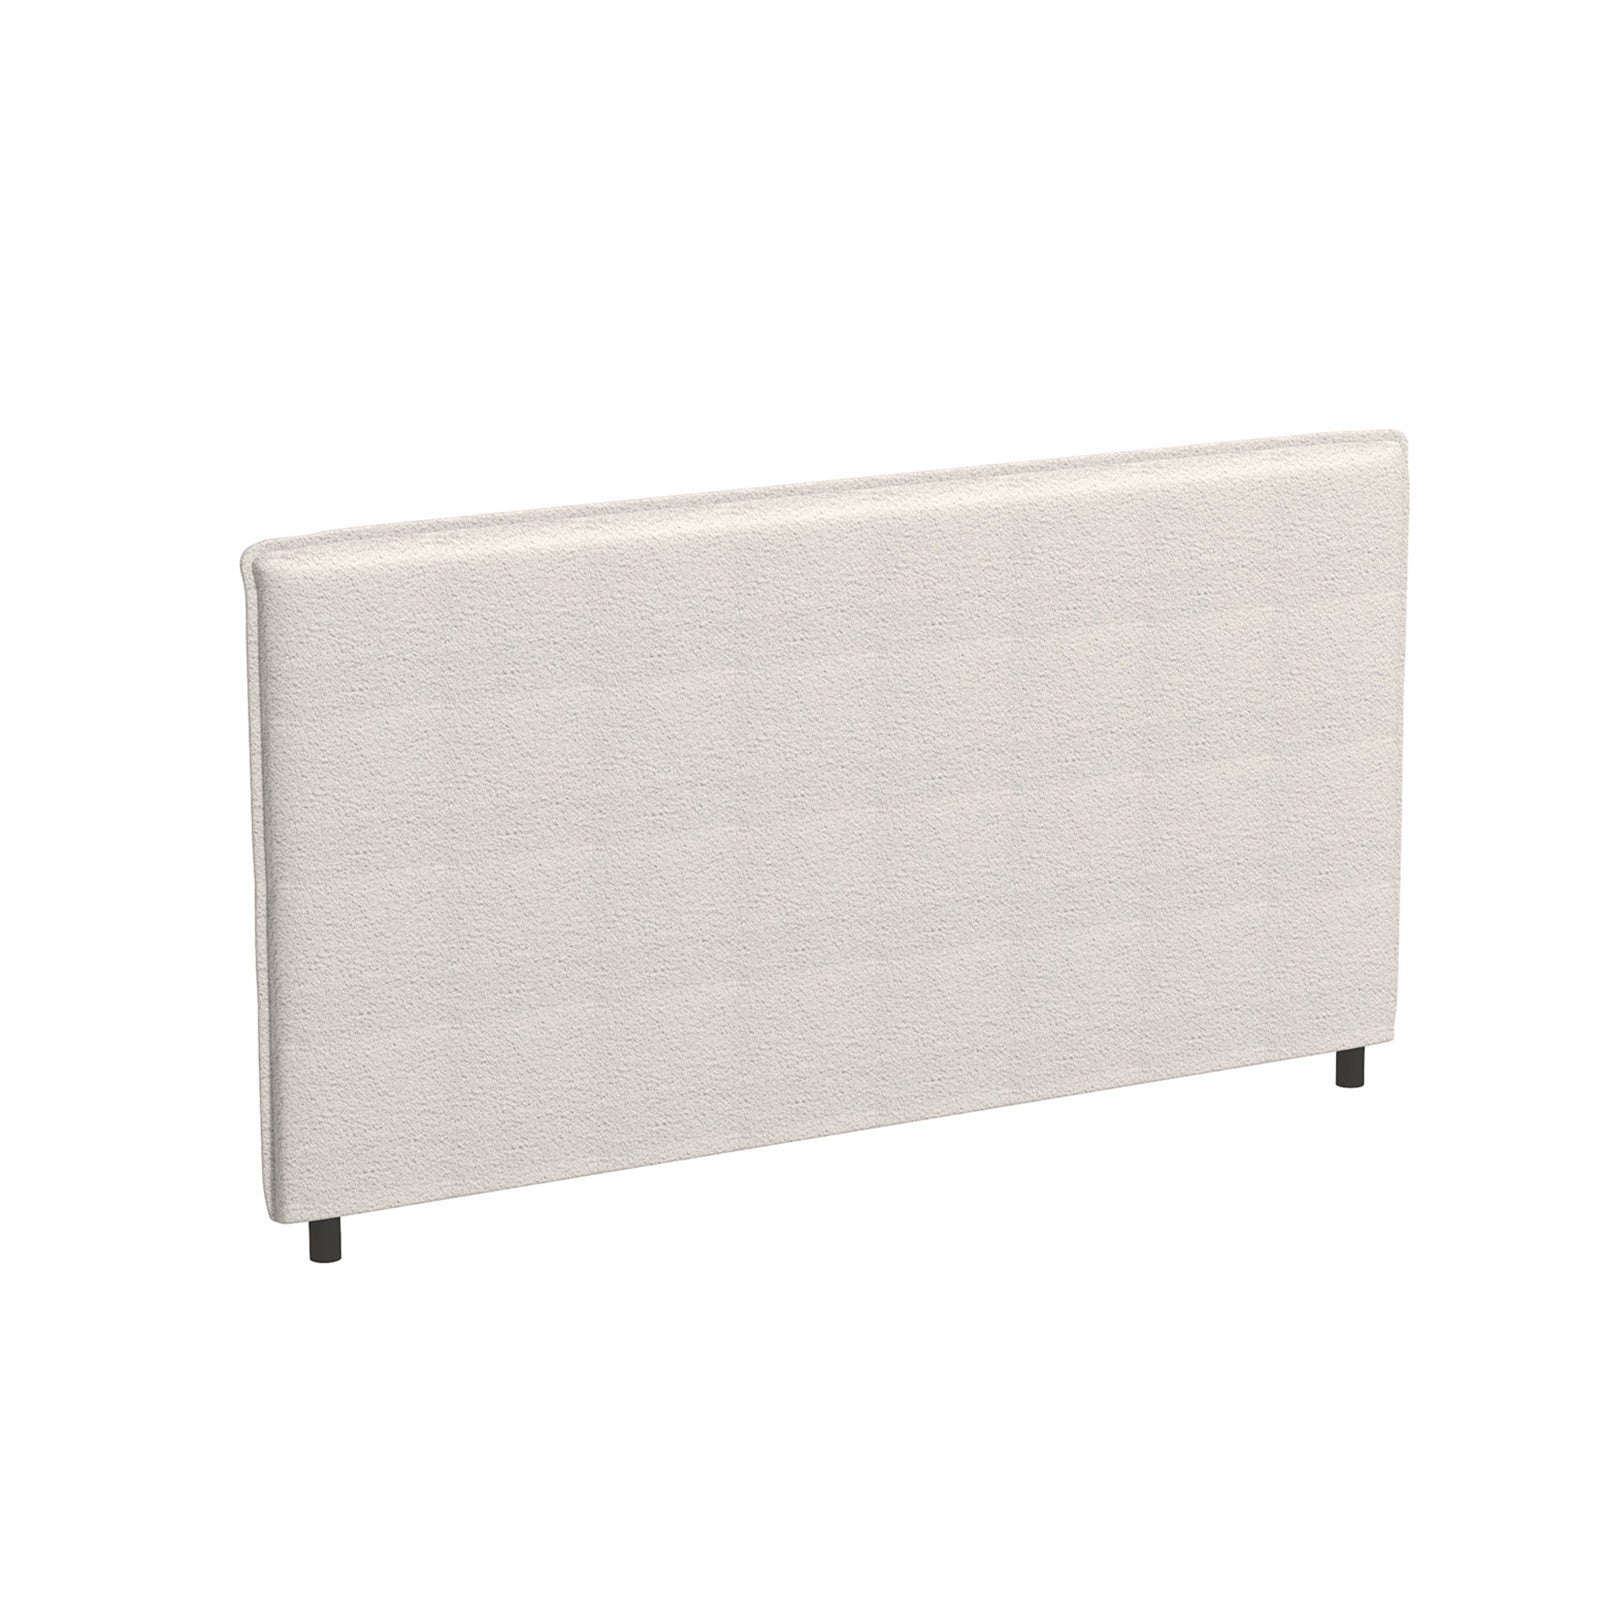 Milano Decor Gia Boucle Bedhead Headboard Upholstered Luxury Cushioned White - Queen - White